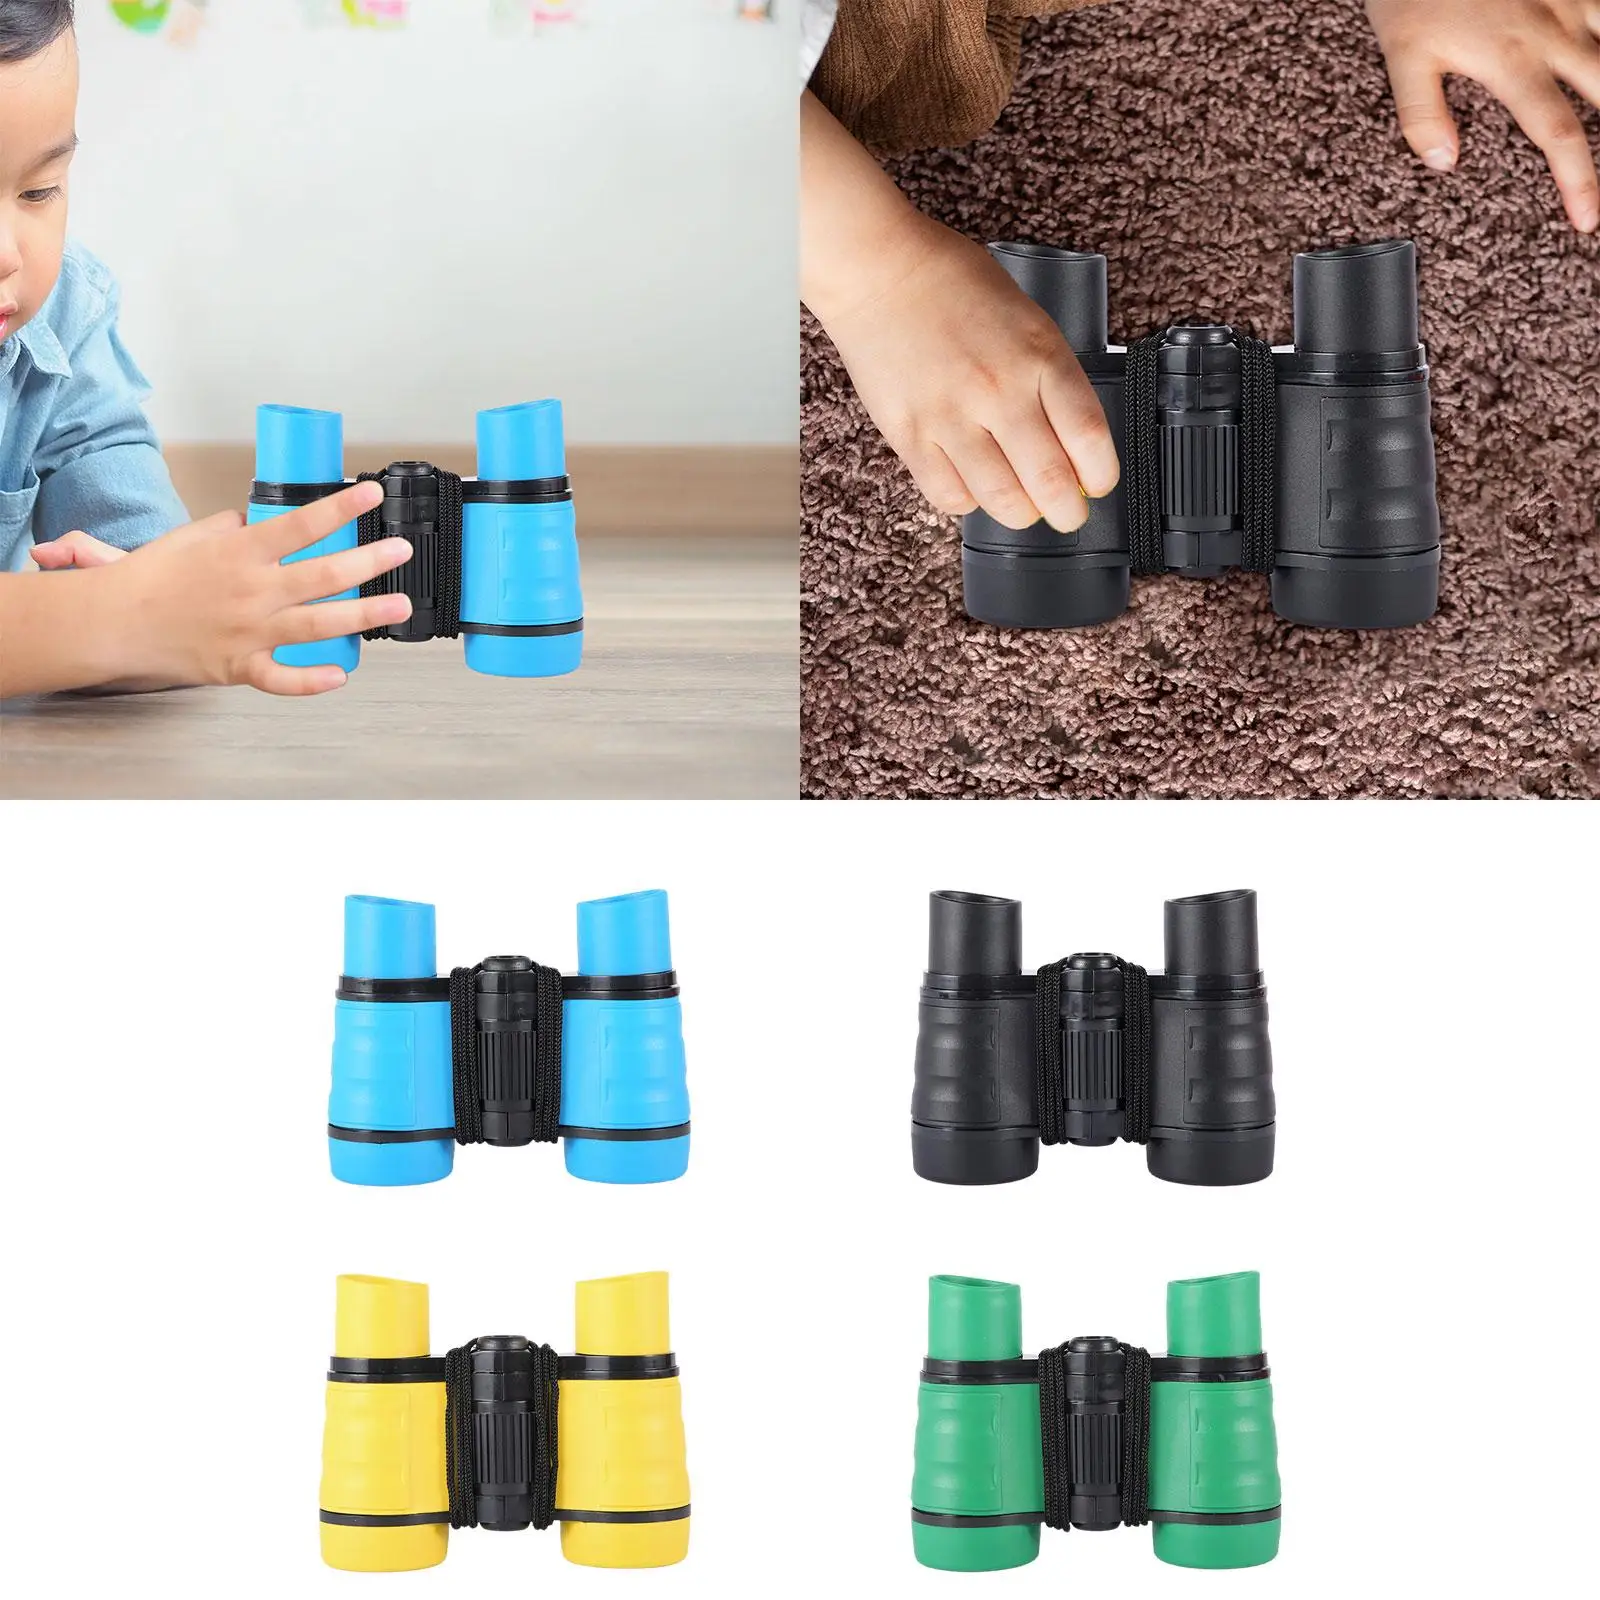 Kids Binoculars Toy 4x30 Shockproof with Lanyard Lightweight for Birthday Insights Presents Exploration Party Favors